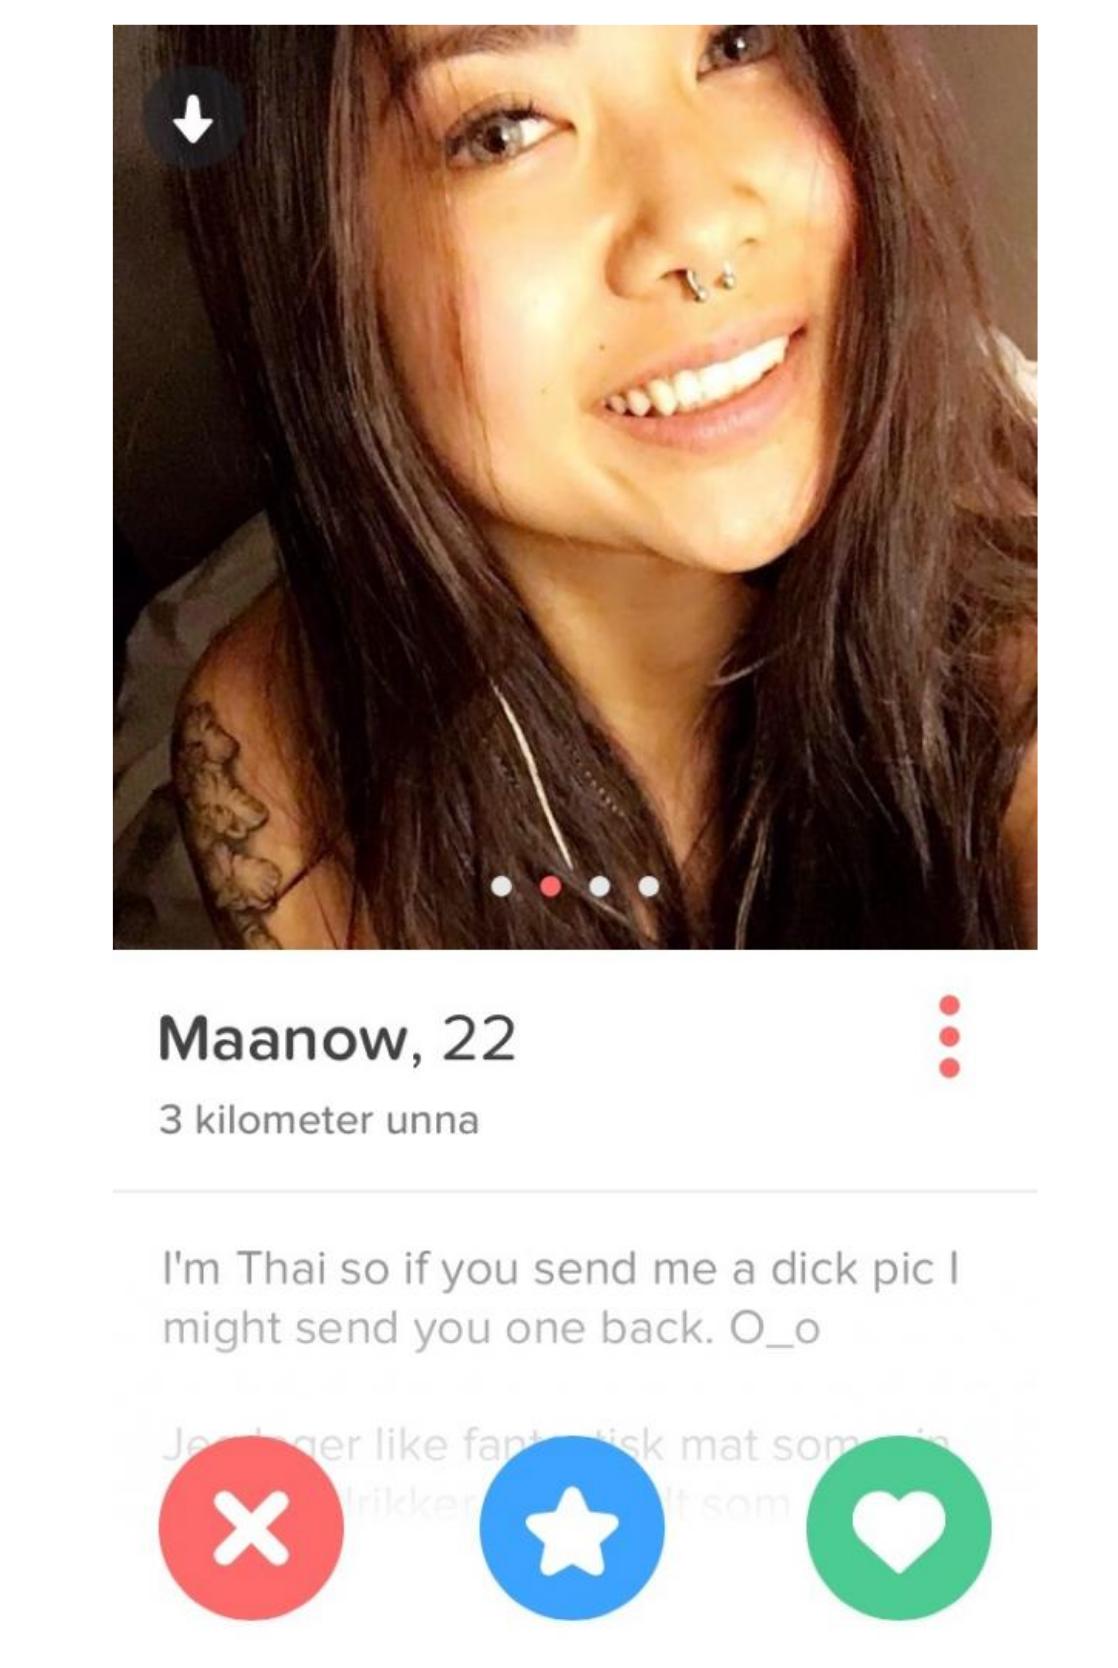 funny tinder bios - Maanow, 22 3 kilometer unna I'm Thai so if you send me a dick pic | might send you one back. O_o er fansk mat som X